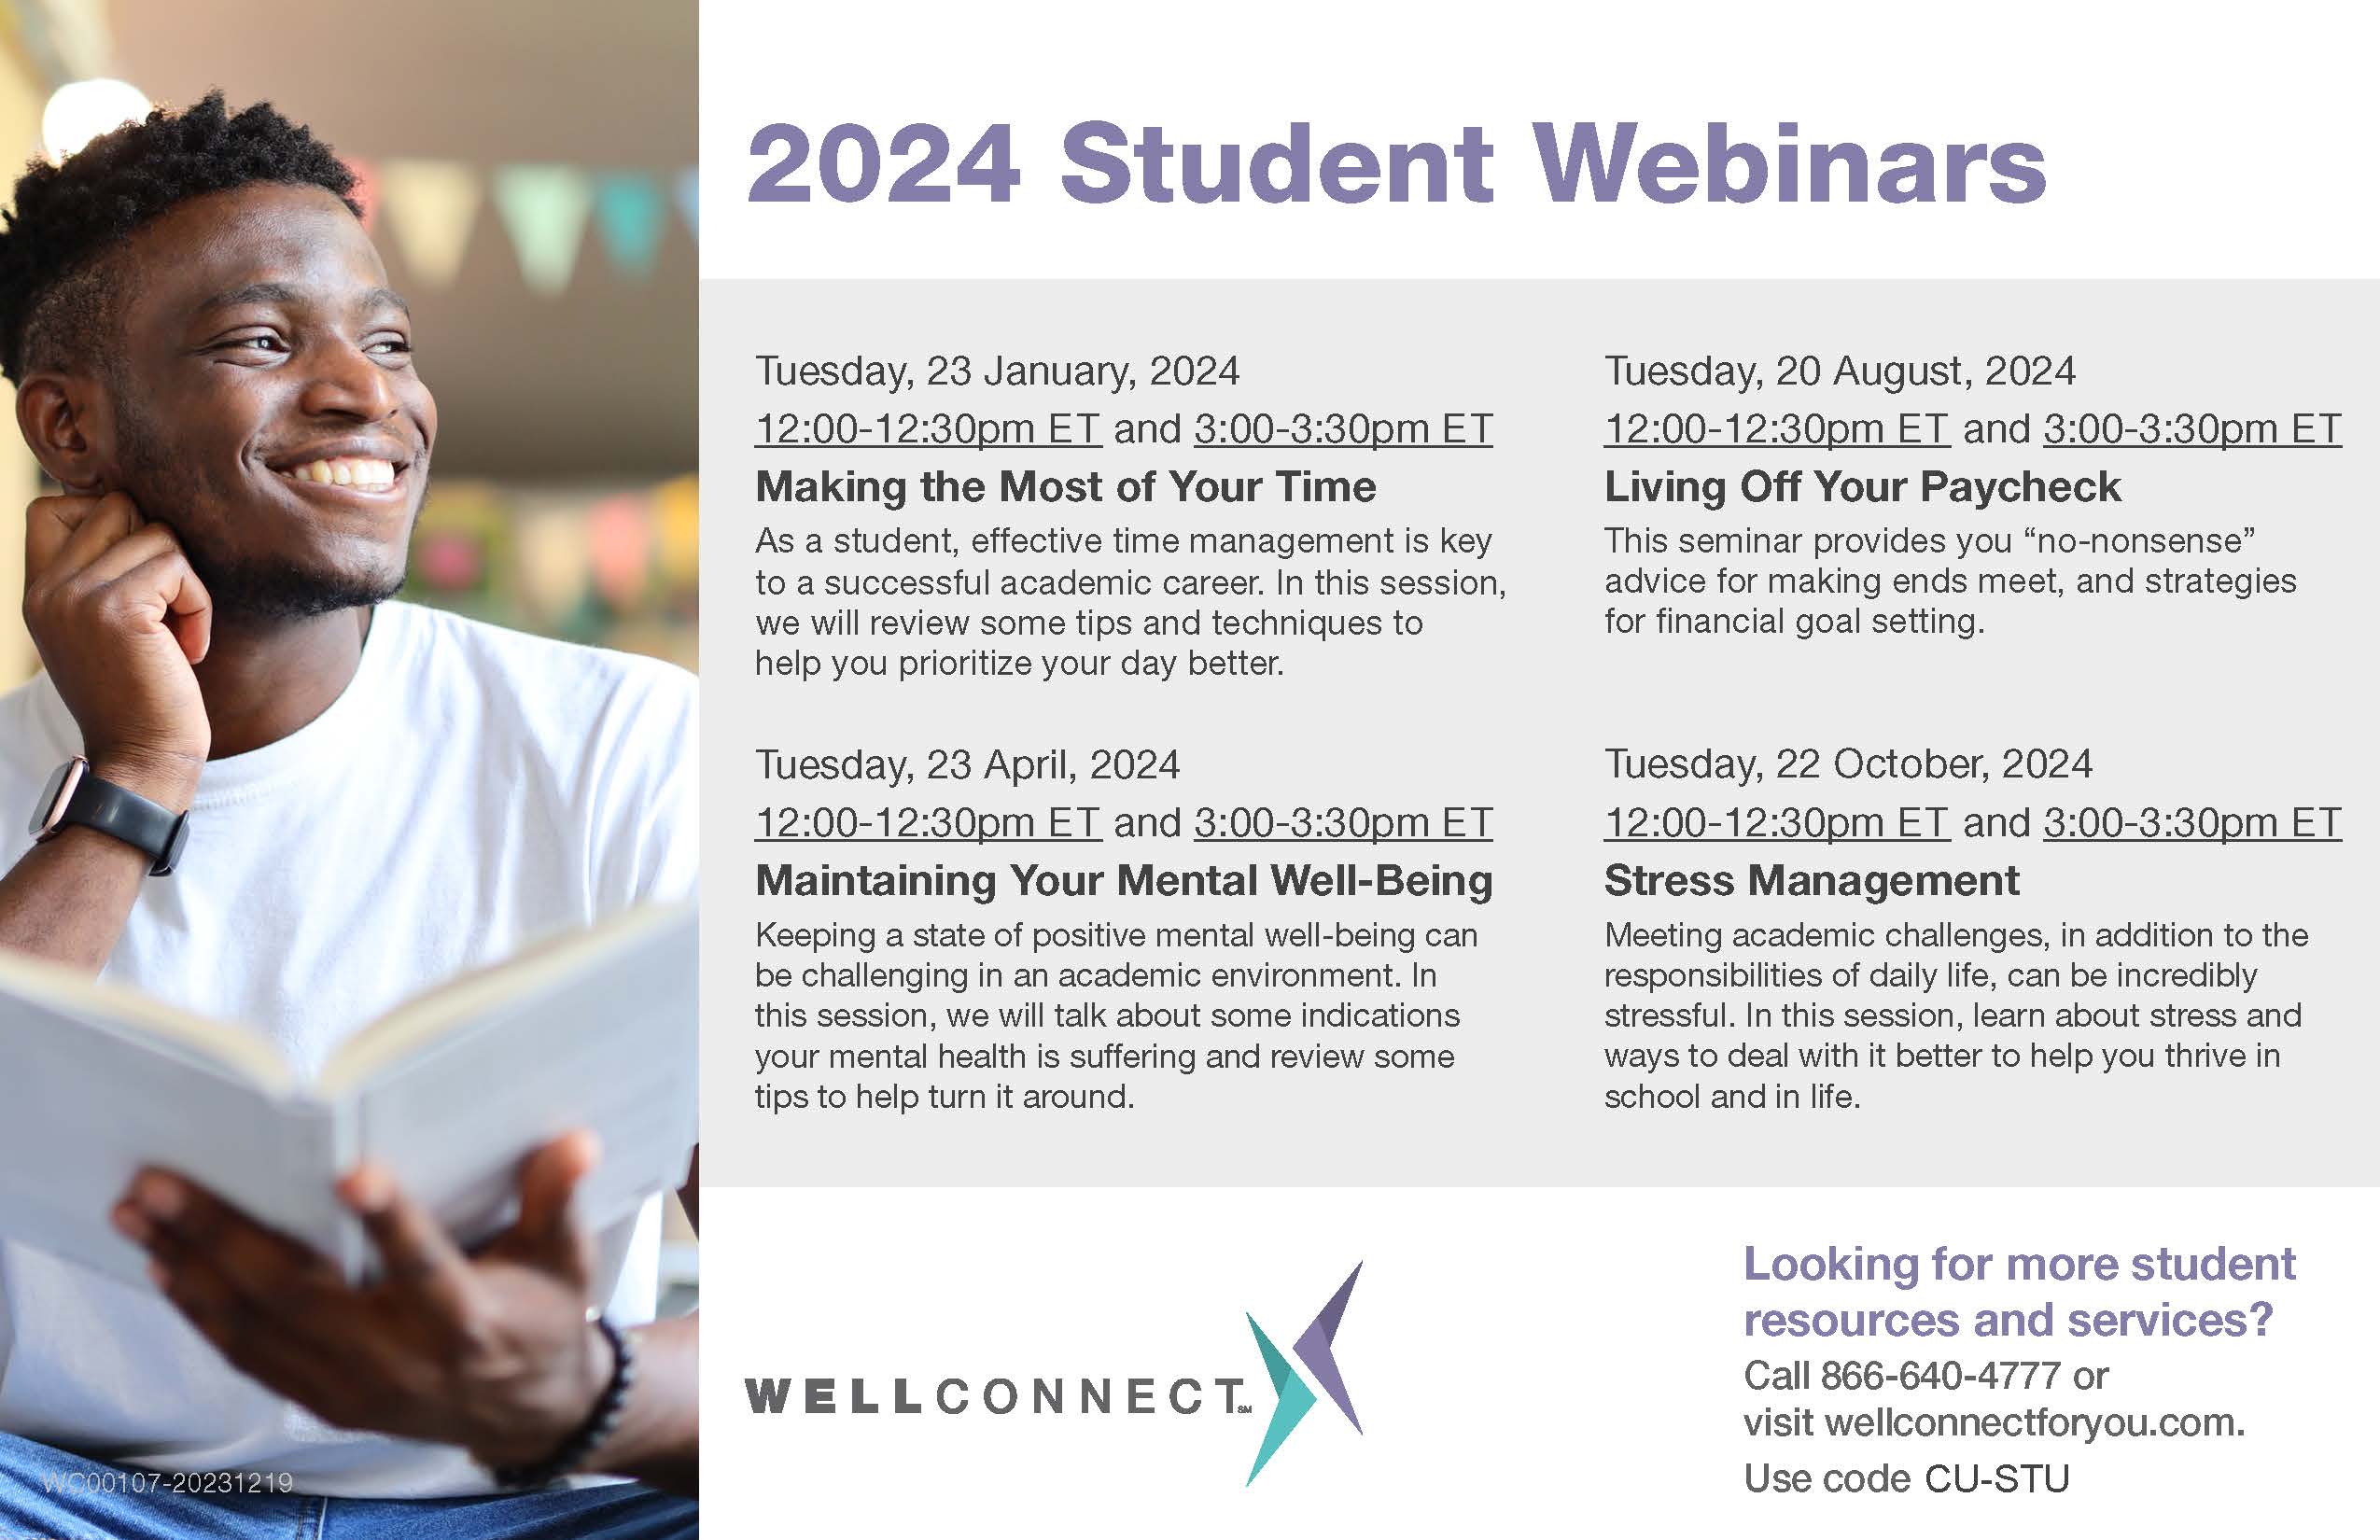 Headshot of man smiling while holding a book next to list of offered webinars. In addition to the webinar listed in the announcement, the flyer includes :Living off Your Paycheck" on August 20, 2024 from 12pm-12:30pm and 3pm-3:30pm, and Stress Management on October 22, 2024 from 12pm-12:30pm and 3pm-3:30pm.